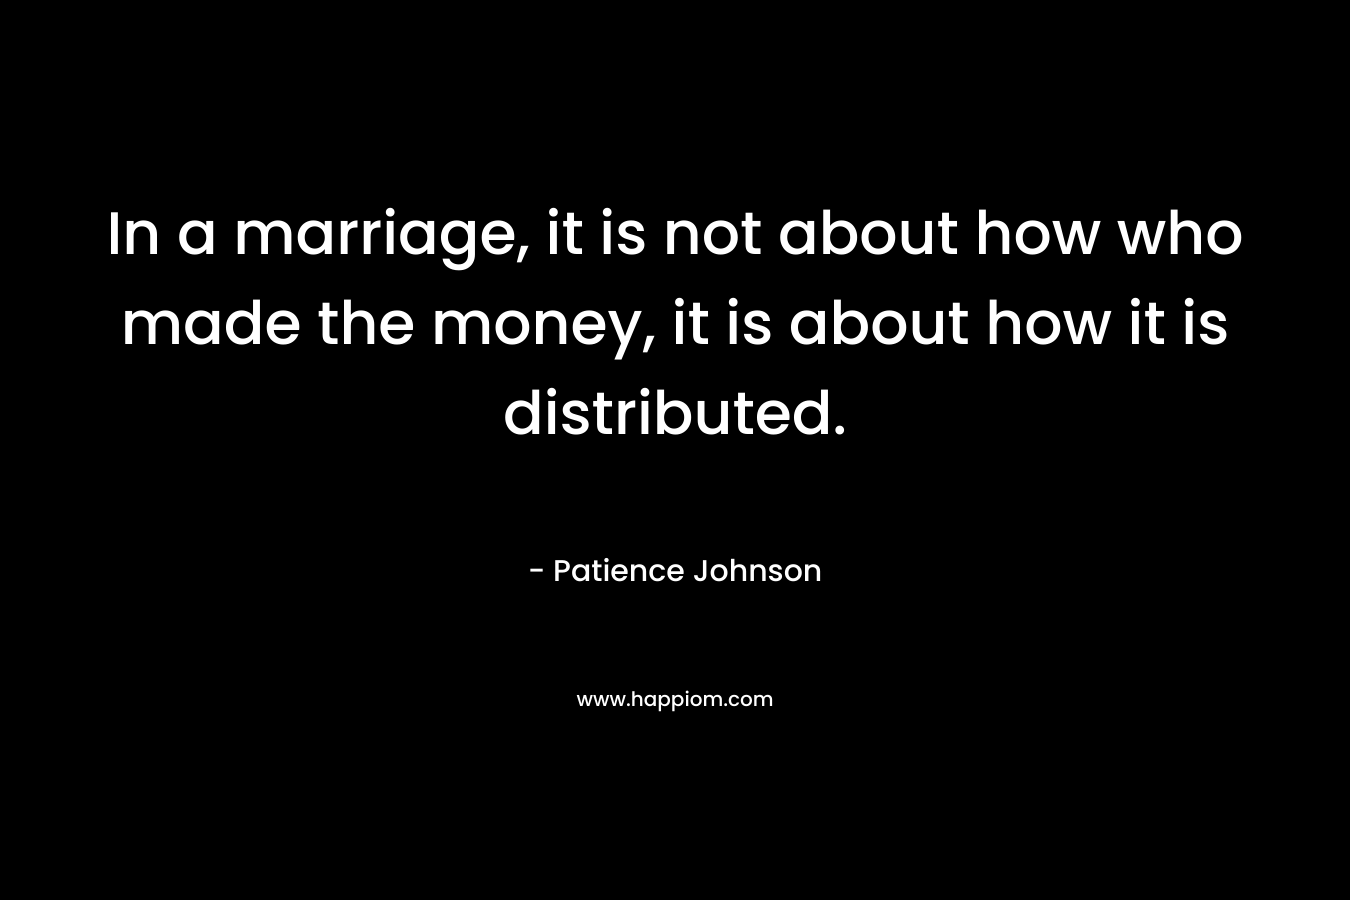 In a marriage, it is not about how who made the money, it is about how it is distributed. – Patience Johnson